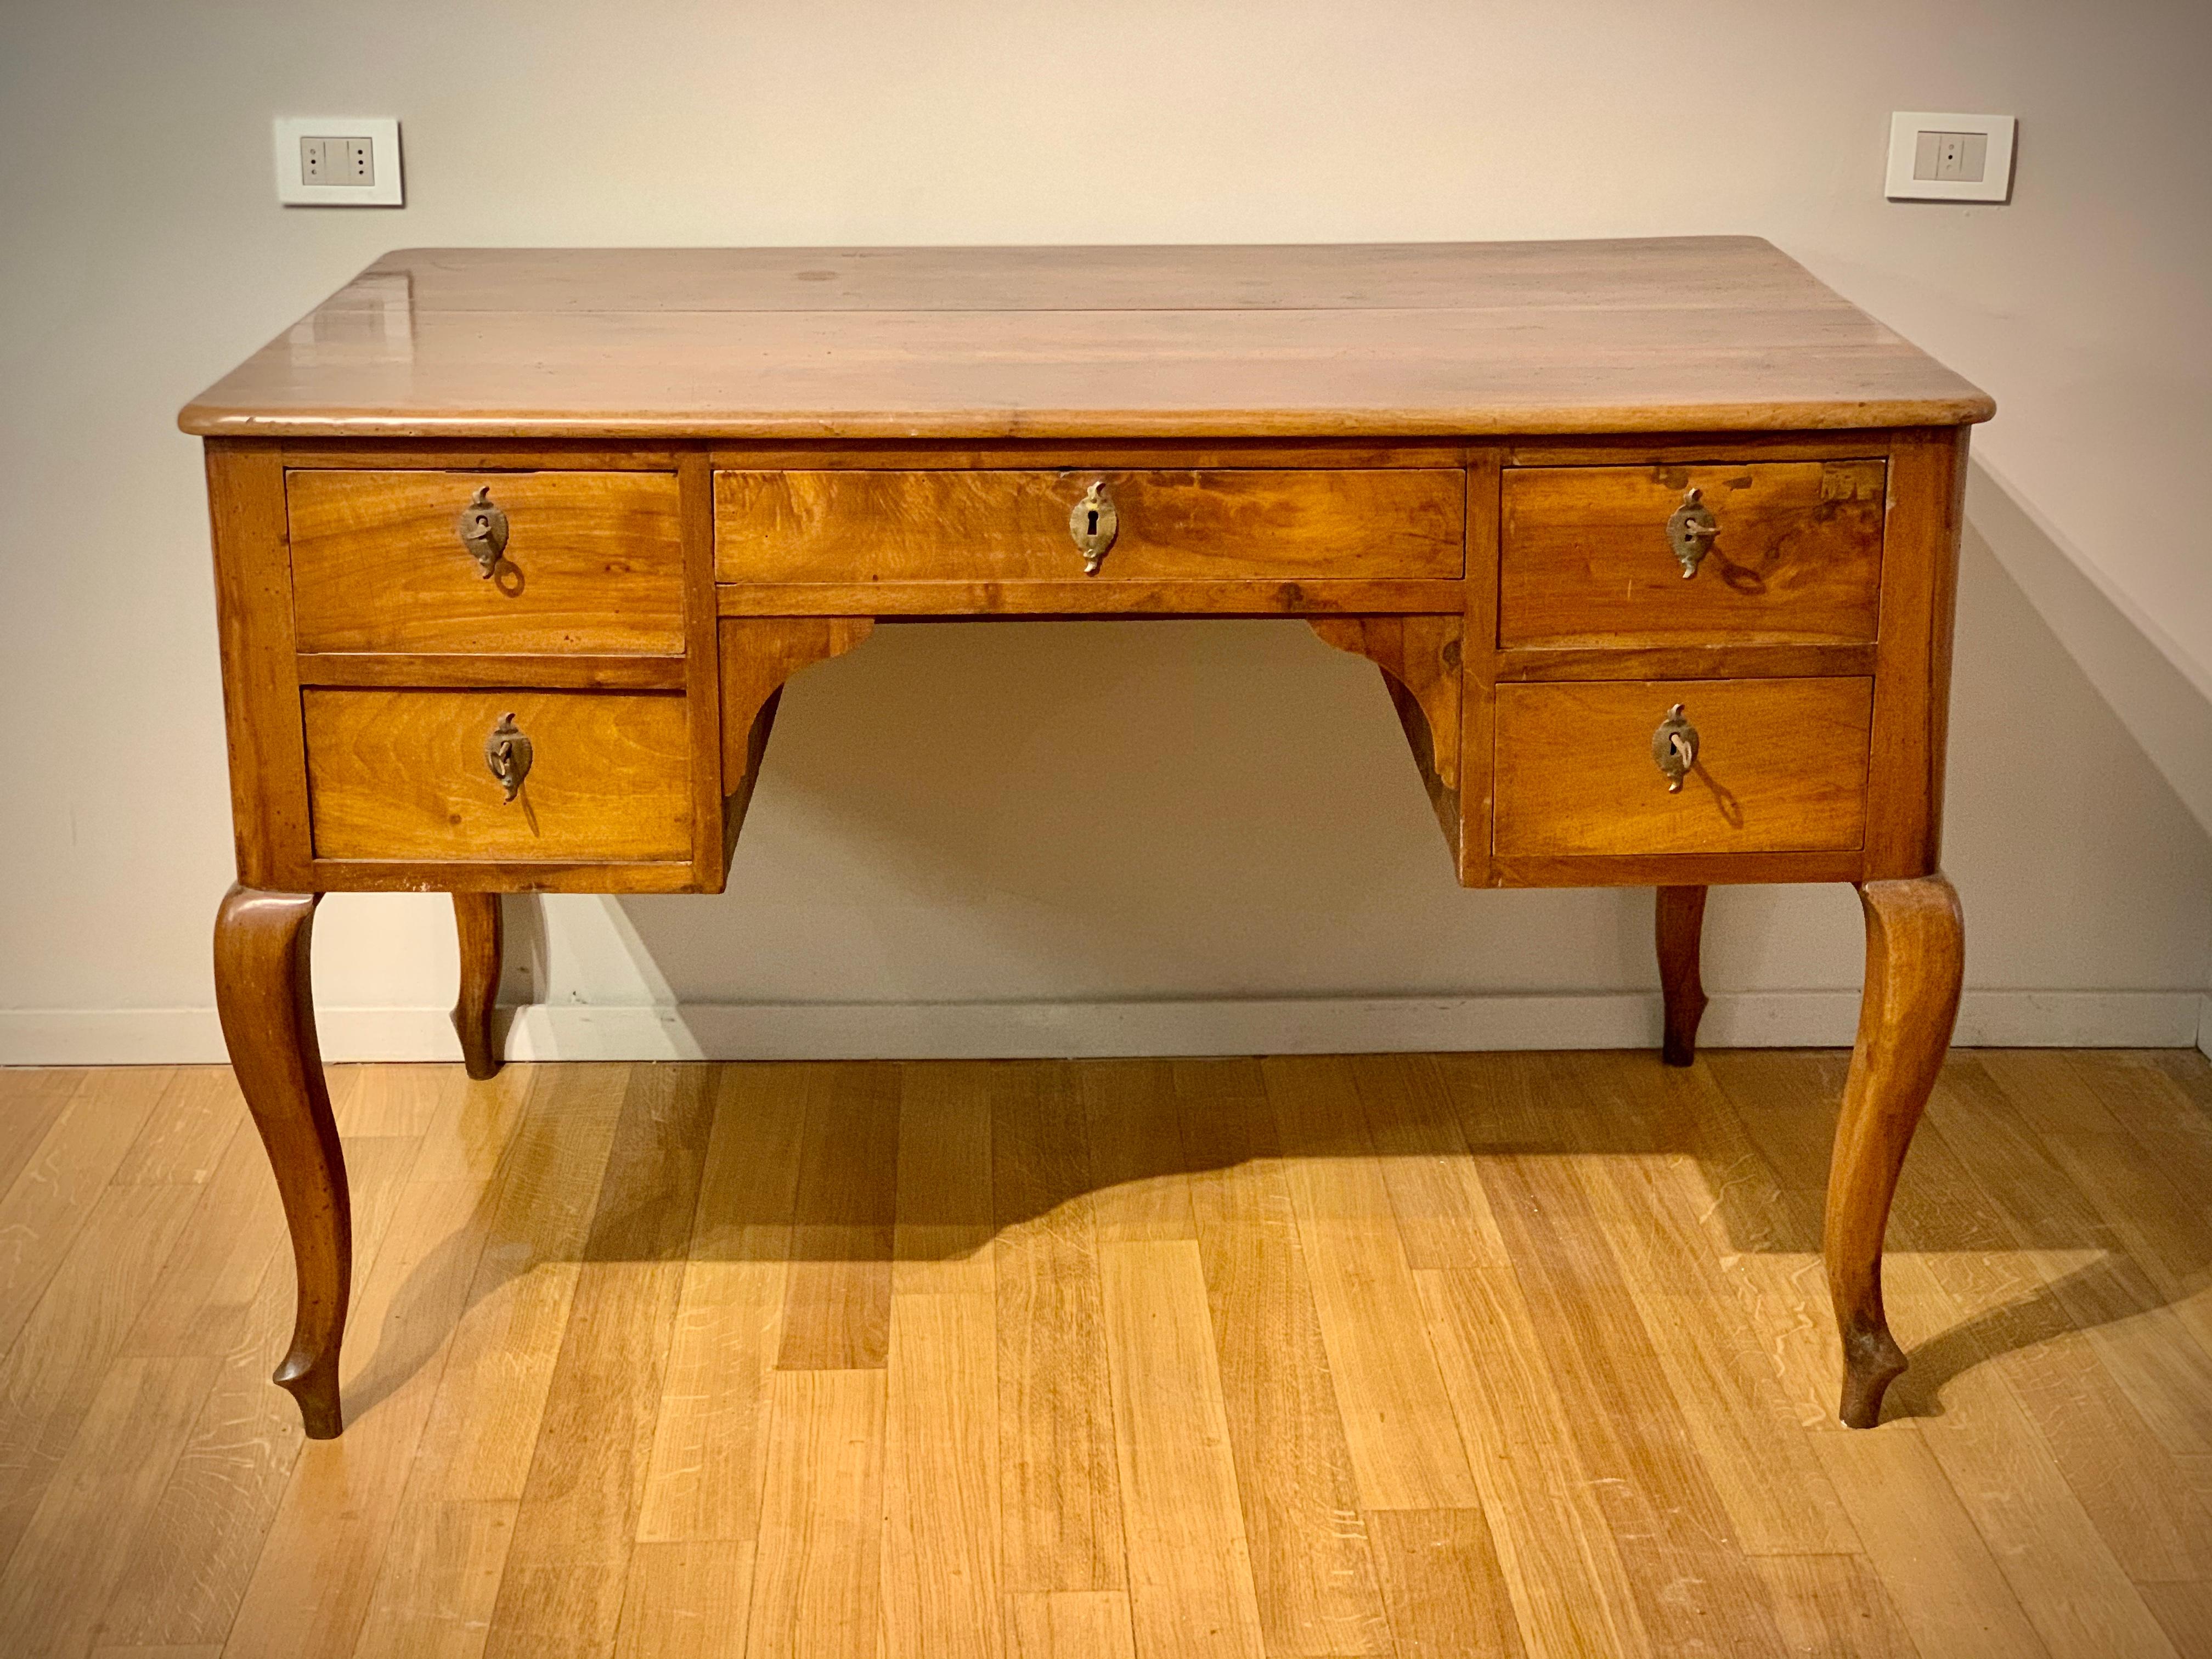 Elegant desk perfect for the center of the room, with drawers in solid walnut and walnut feather veneer on the sides, interiors in poplar. The drawers are all equipped with locks. Tuscan manufacture of the mid-18th century.
In good condition, very